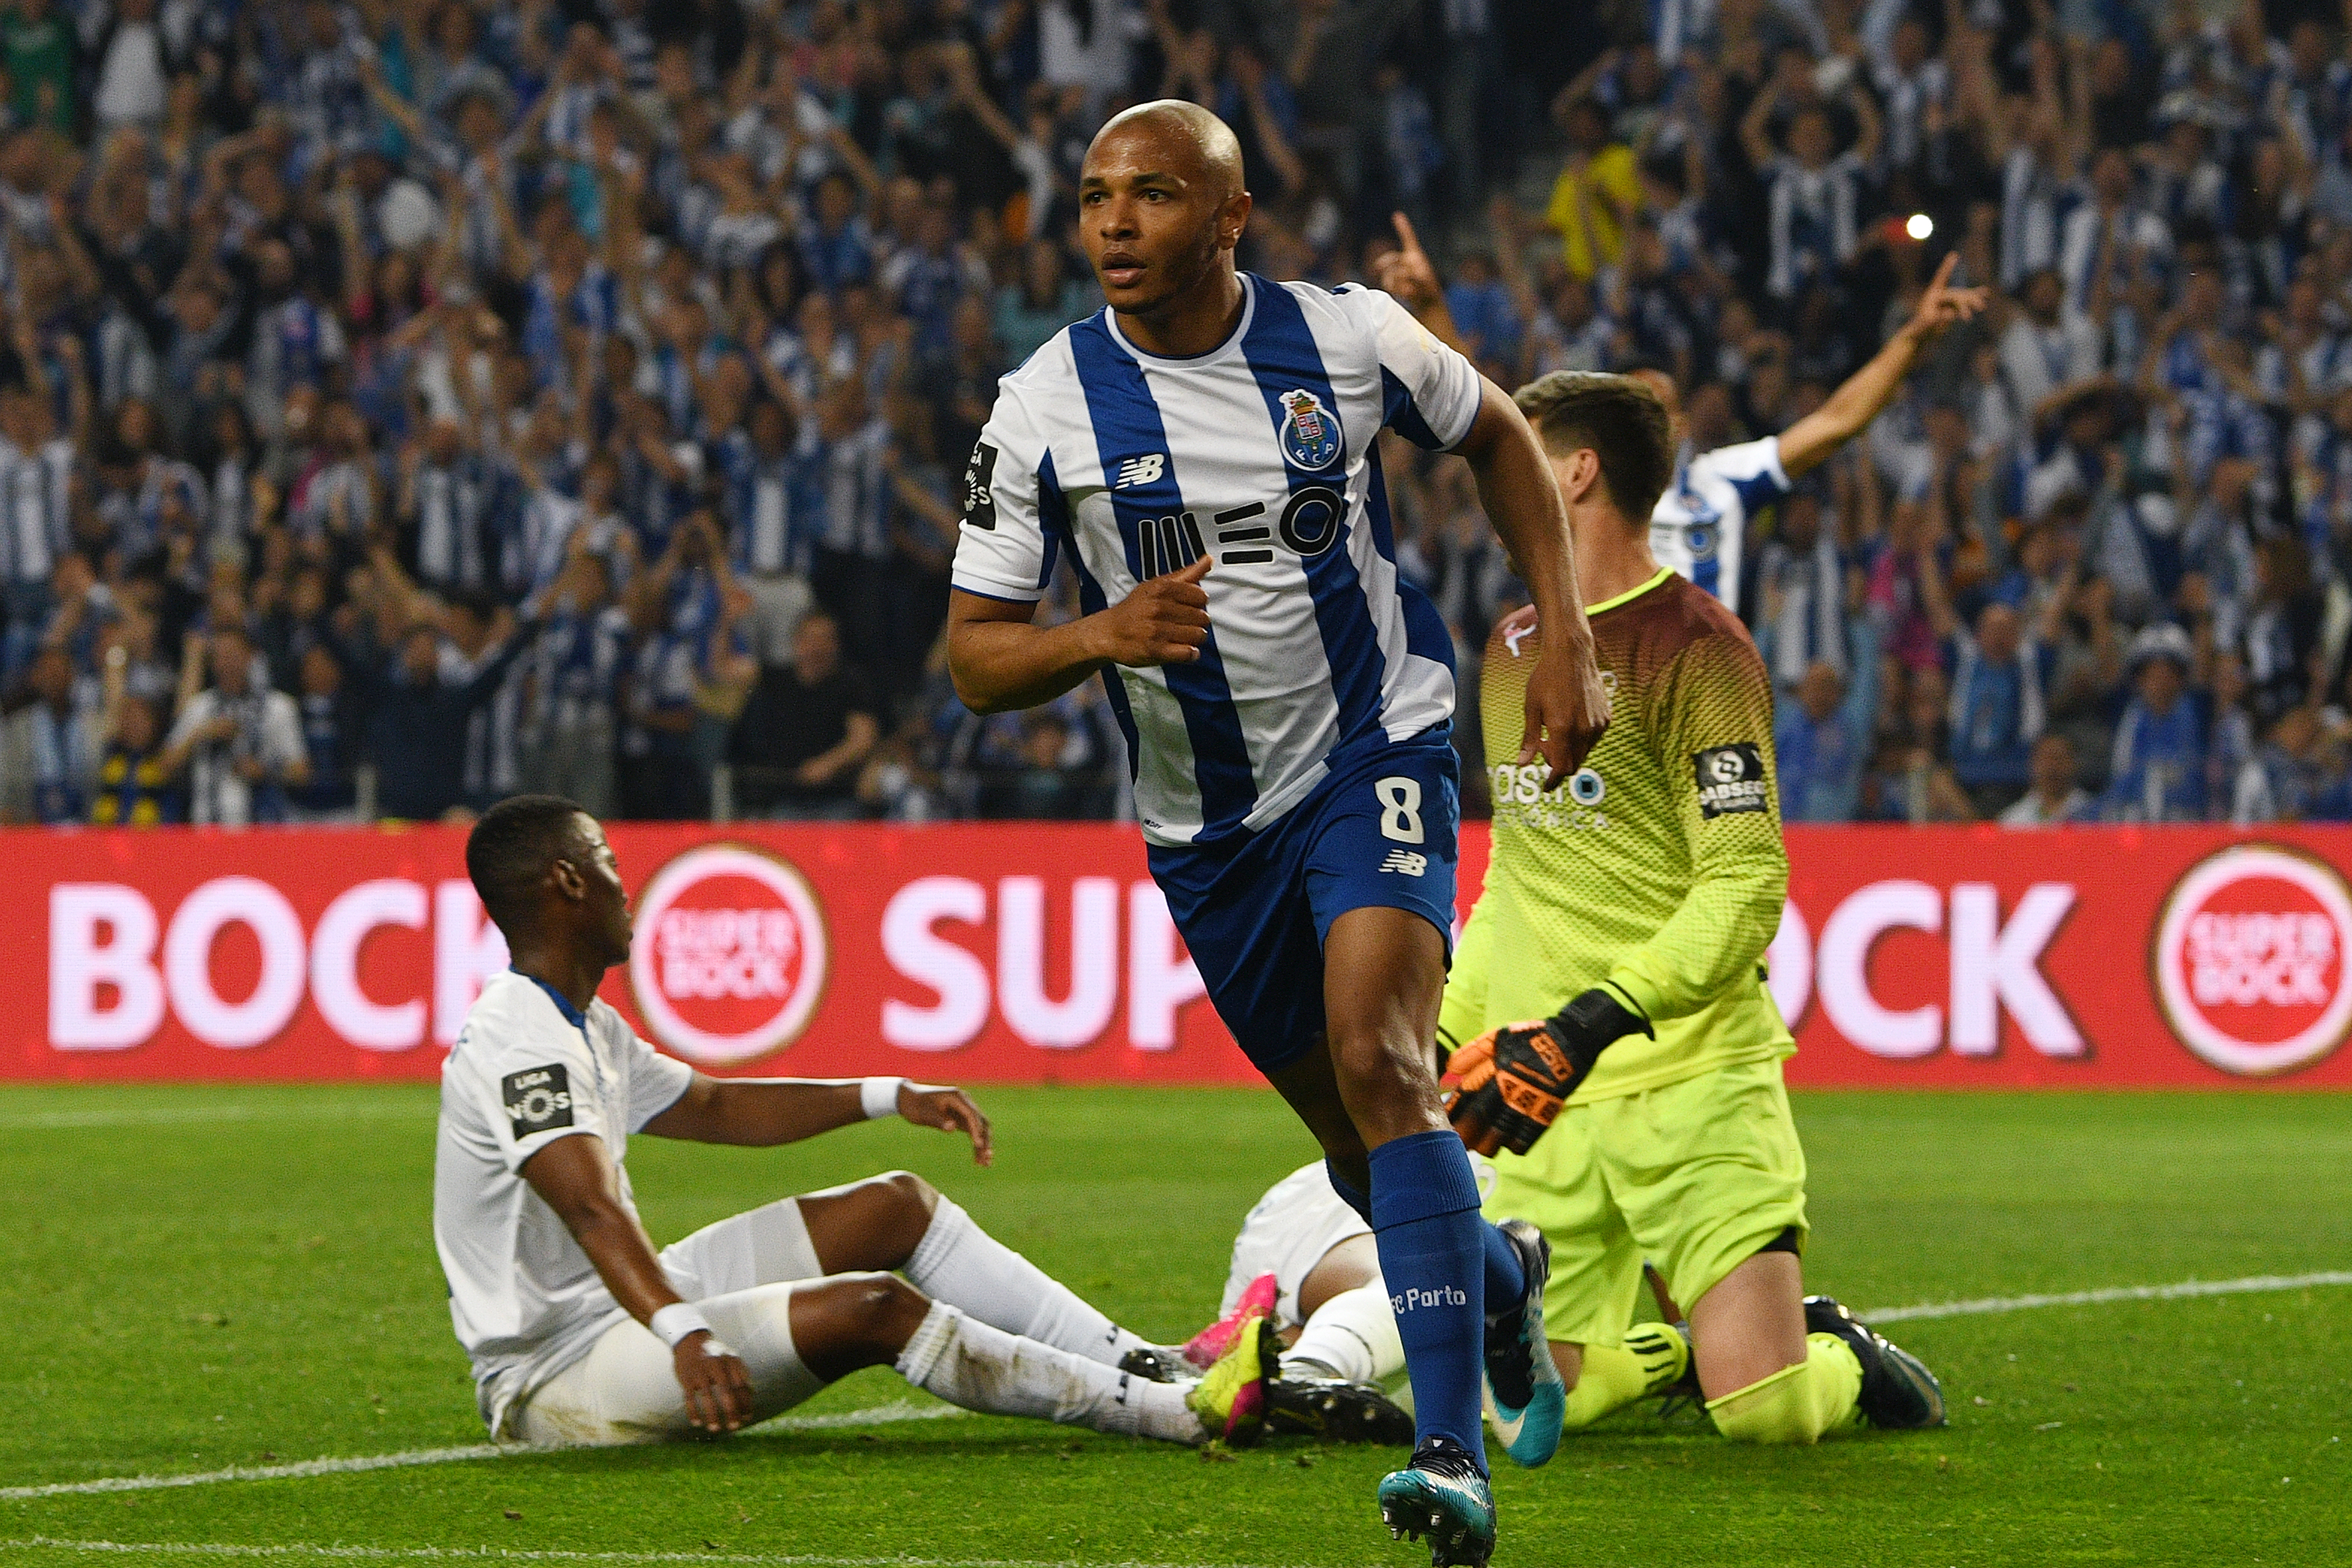 PORTO, PORTUGAL - MAY 06: Yacine Brahimi of FC Porto scores the second goal during the Primeira Liga match between FC Porto and Feirense at Estadio do Dragao on May 6, 2018 in Porto, Portugal. (Photo by Octavio Passos/Getty Images)